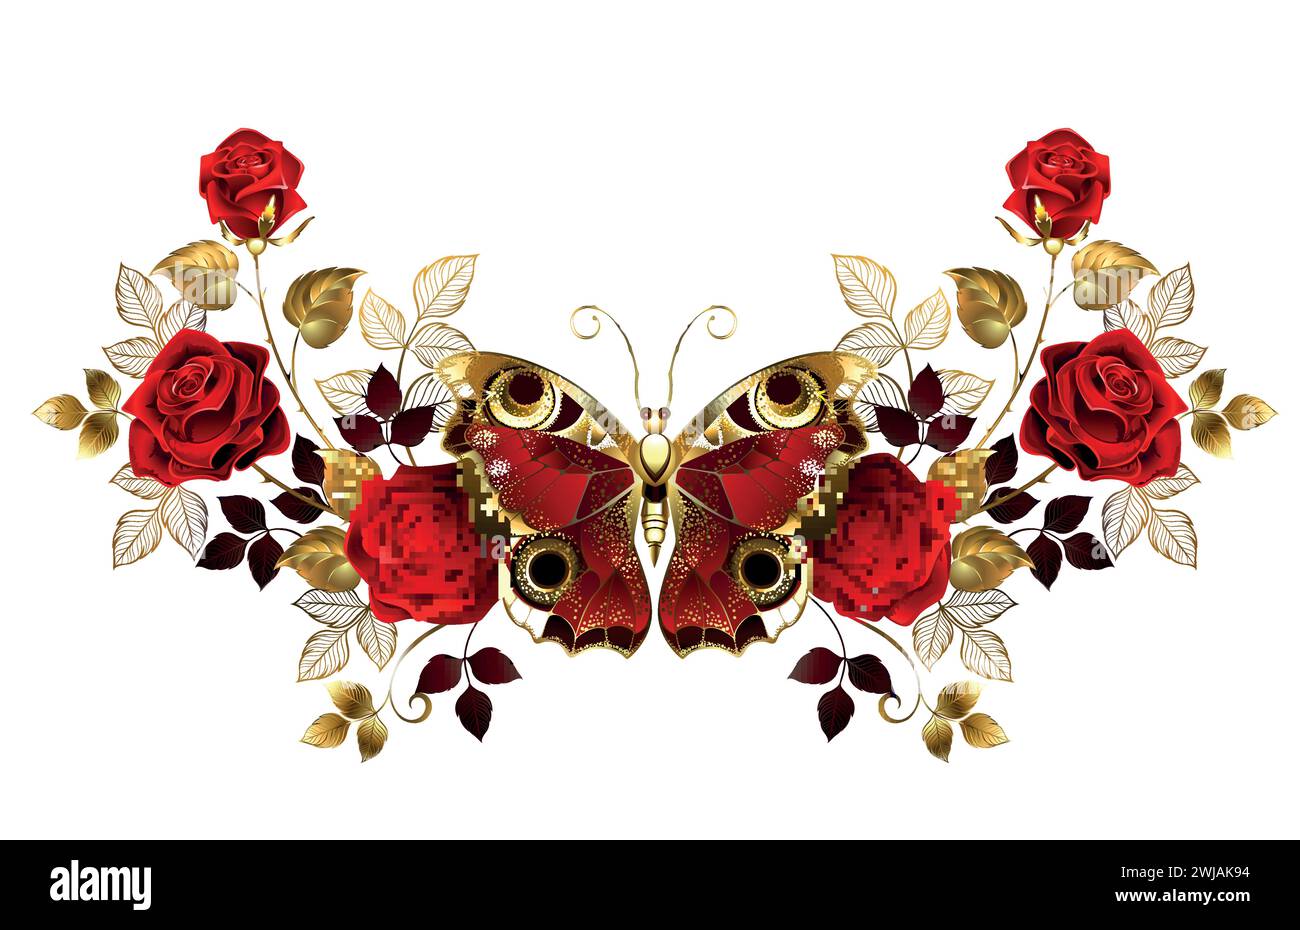 Symmetrical floral arrangement of red, blooming roses with gold jewelry, leaves and stems and detailed, red peacock butterfly on white background. Red Stock Vector